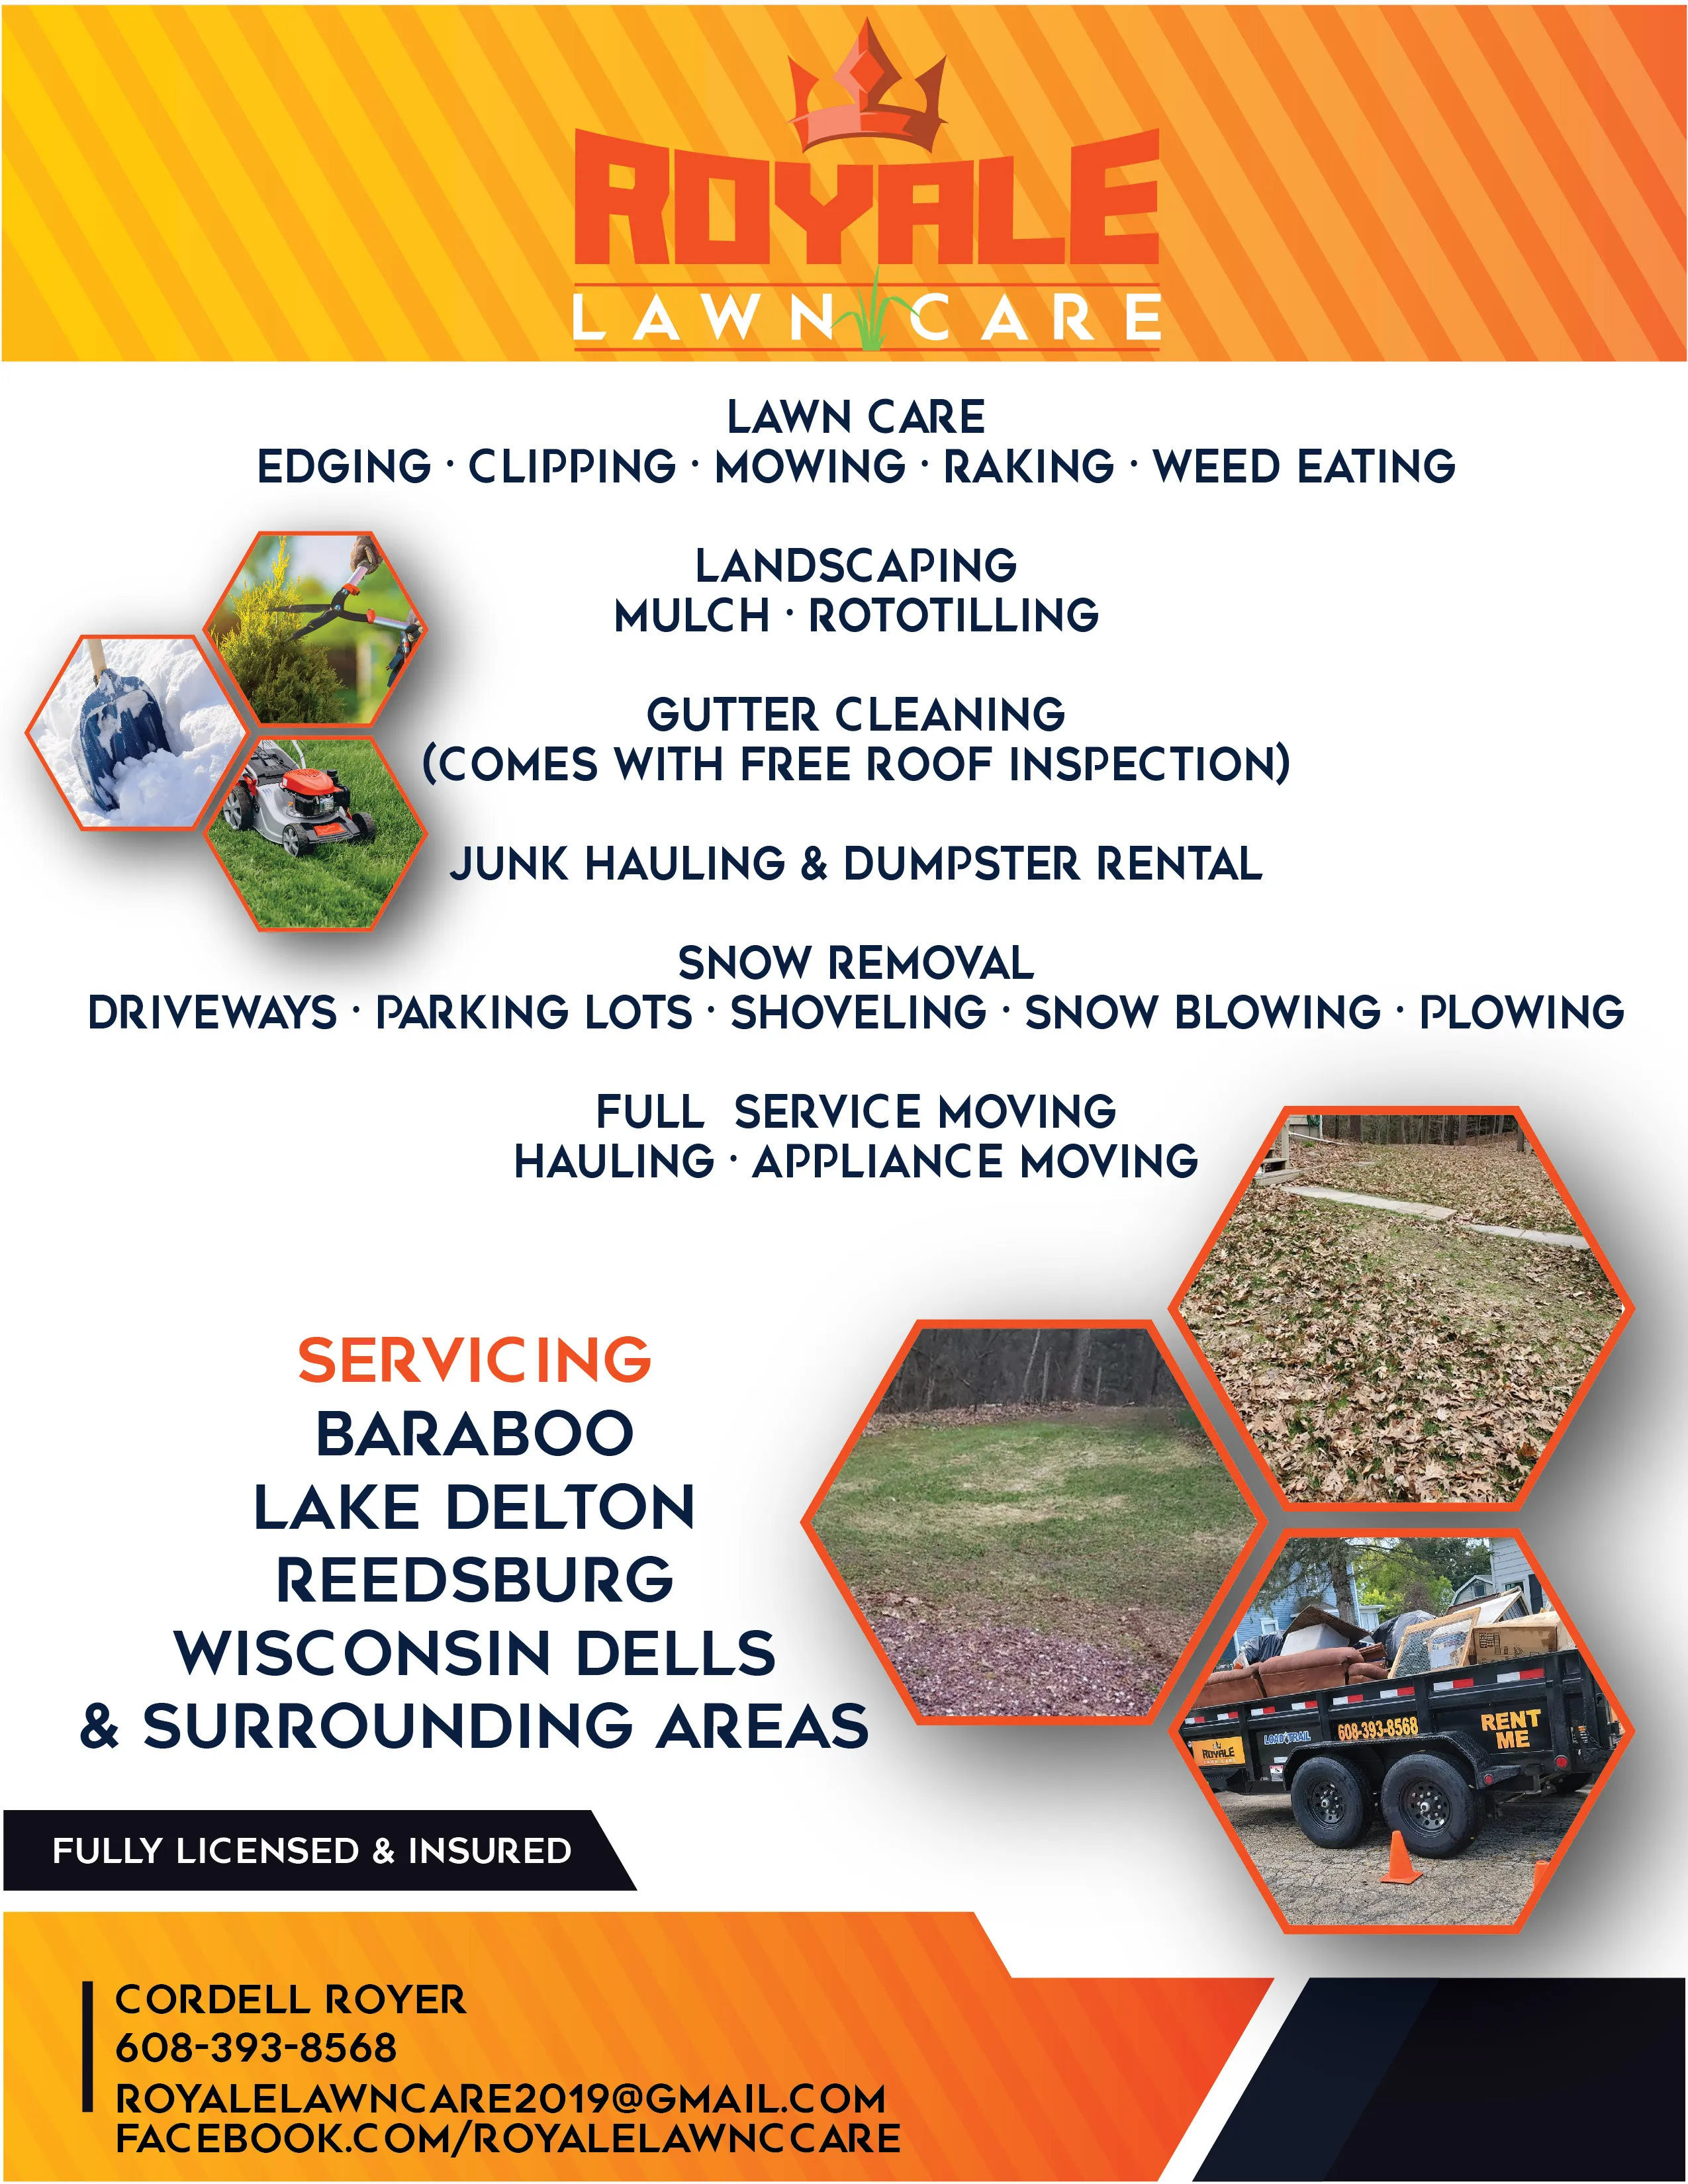 Lawn Care and Landscape for Royale Lawn Care and Maintenance LLC in Reedsburg, WI